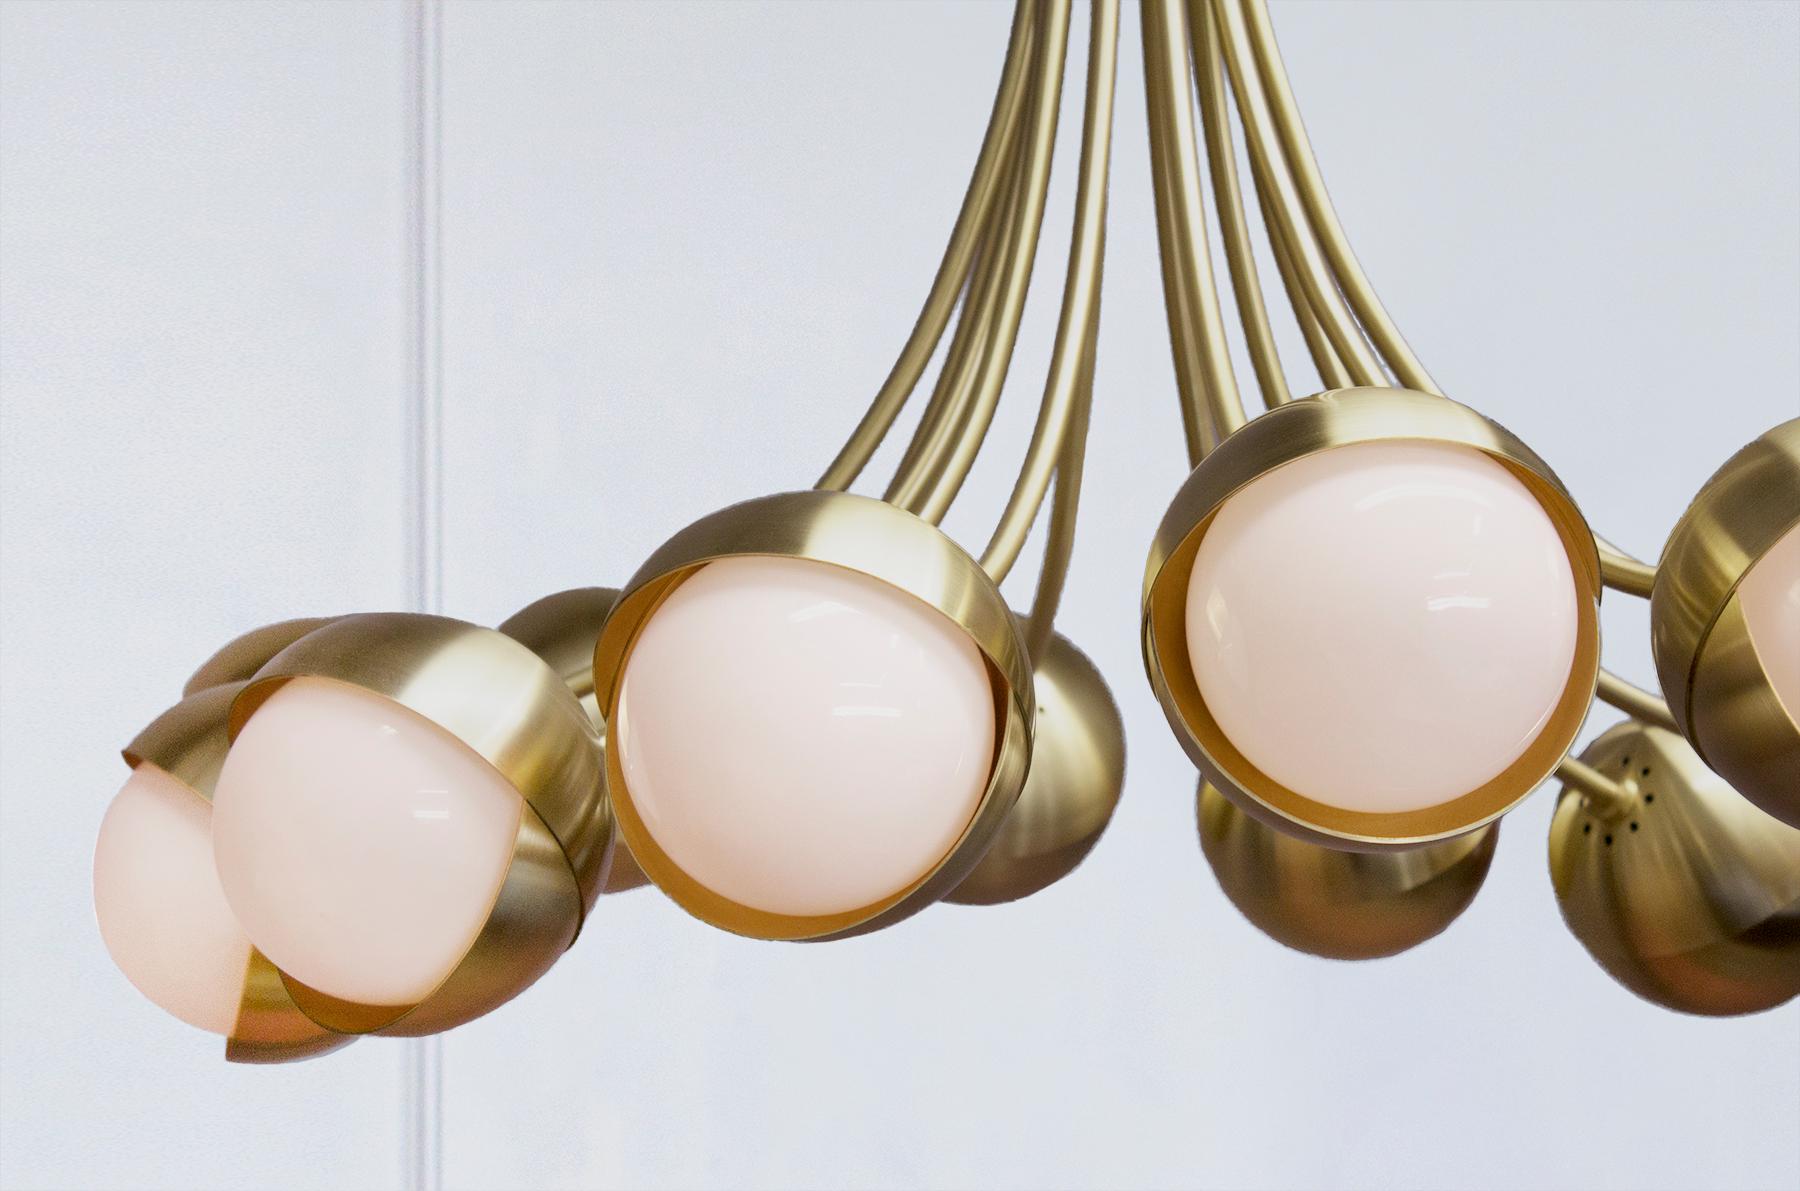 The Benedict™ 12-light chandelier puts the Benedict™ light assembly on full display. Laid out on a gently arching array, each nested pair of brass hemispheres cradles a white opal glass globe suspended by hand rolled brass stems. In addition to a